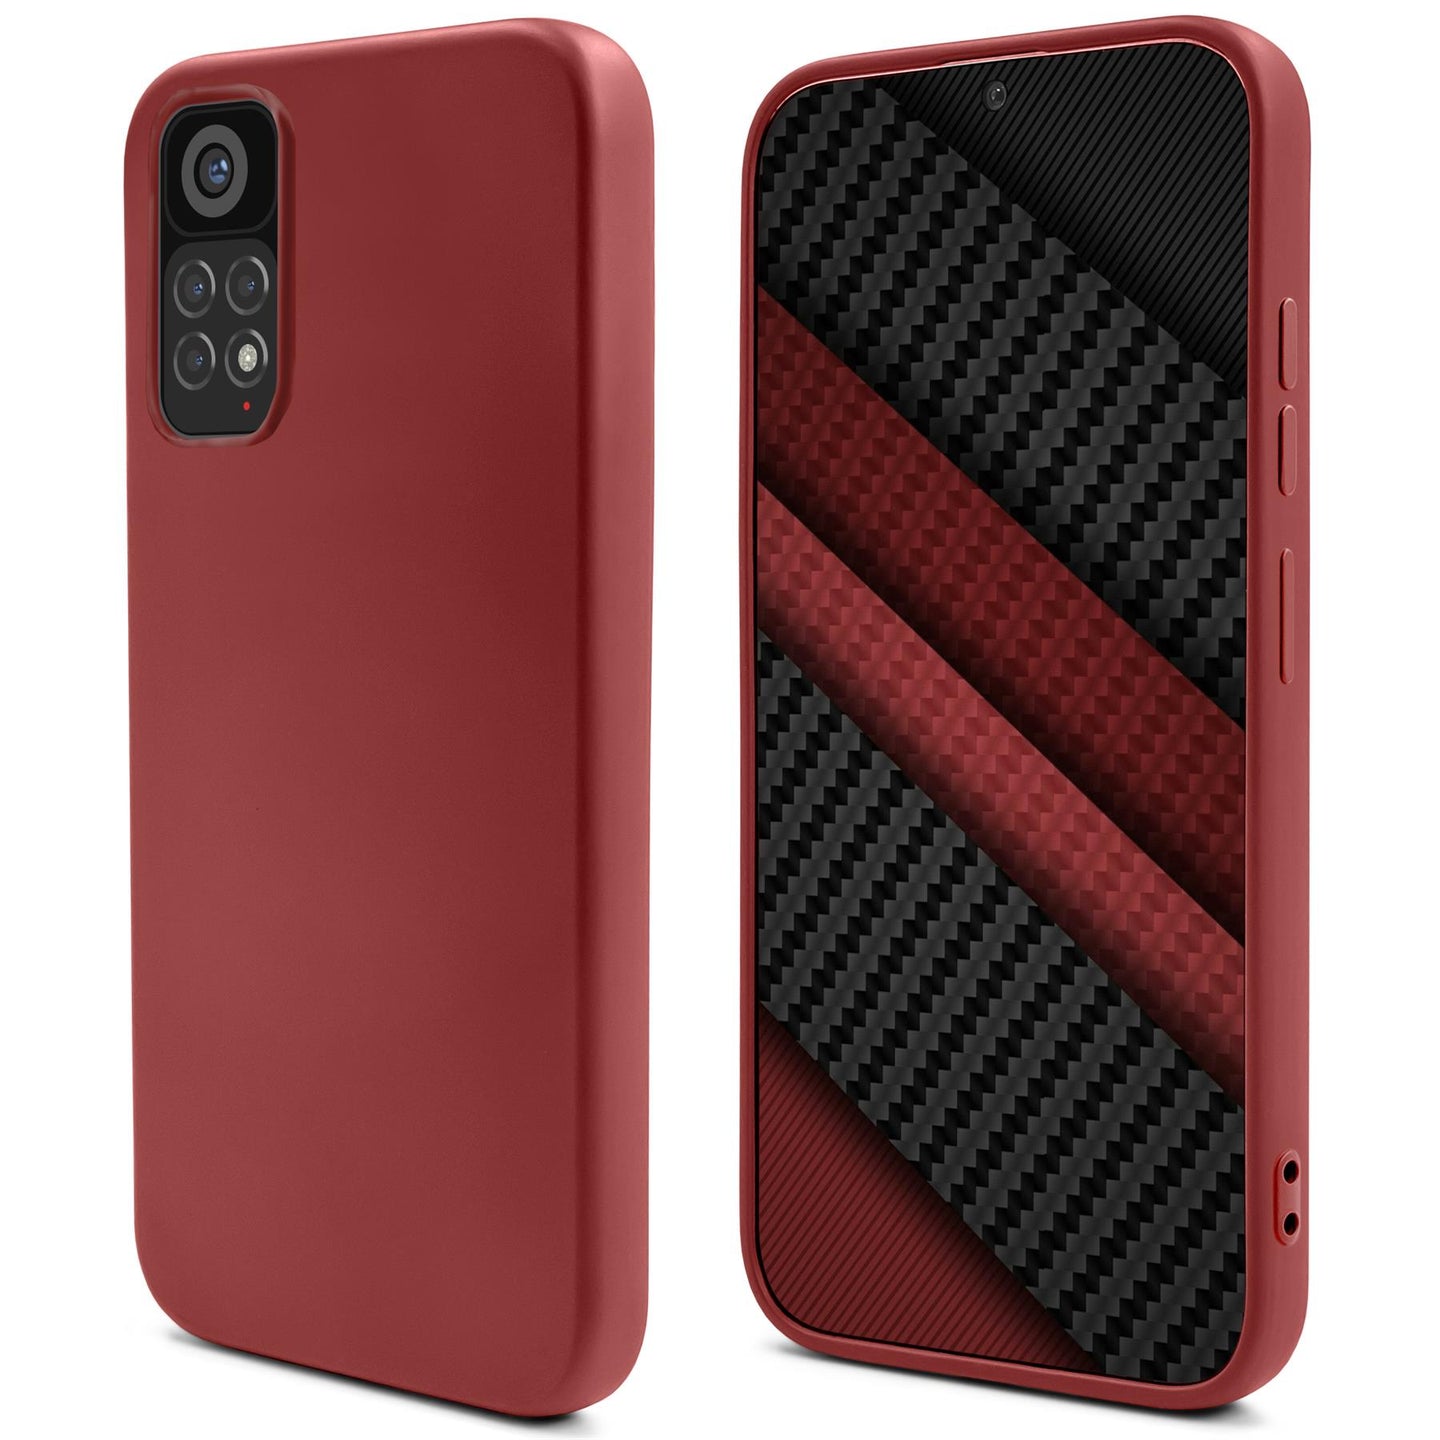 Moozy Lifestyle. Silicone Case for Xiaomi Redmi Note 11 and 11S, Vintage Pink - Liquid Silicone Lightweight Cover with Matte Finish and Soft Microfiber Lining, Premium Silicone Case